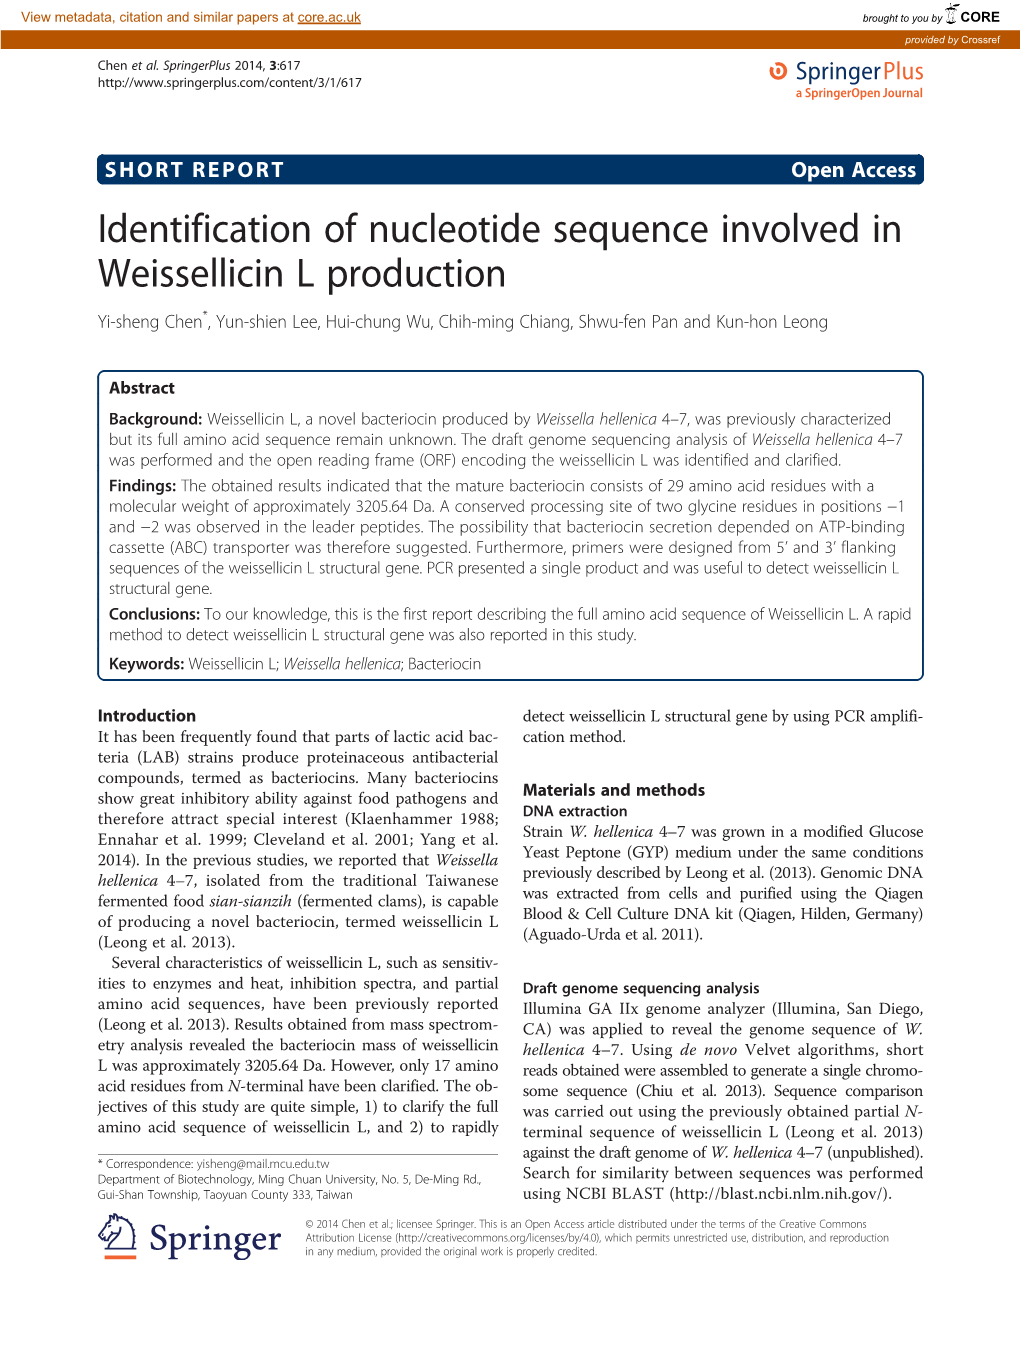 Identification of Nucleotide Sequence Involved in Weissellicin L Production